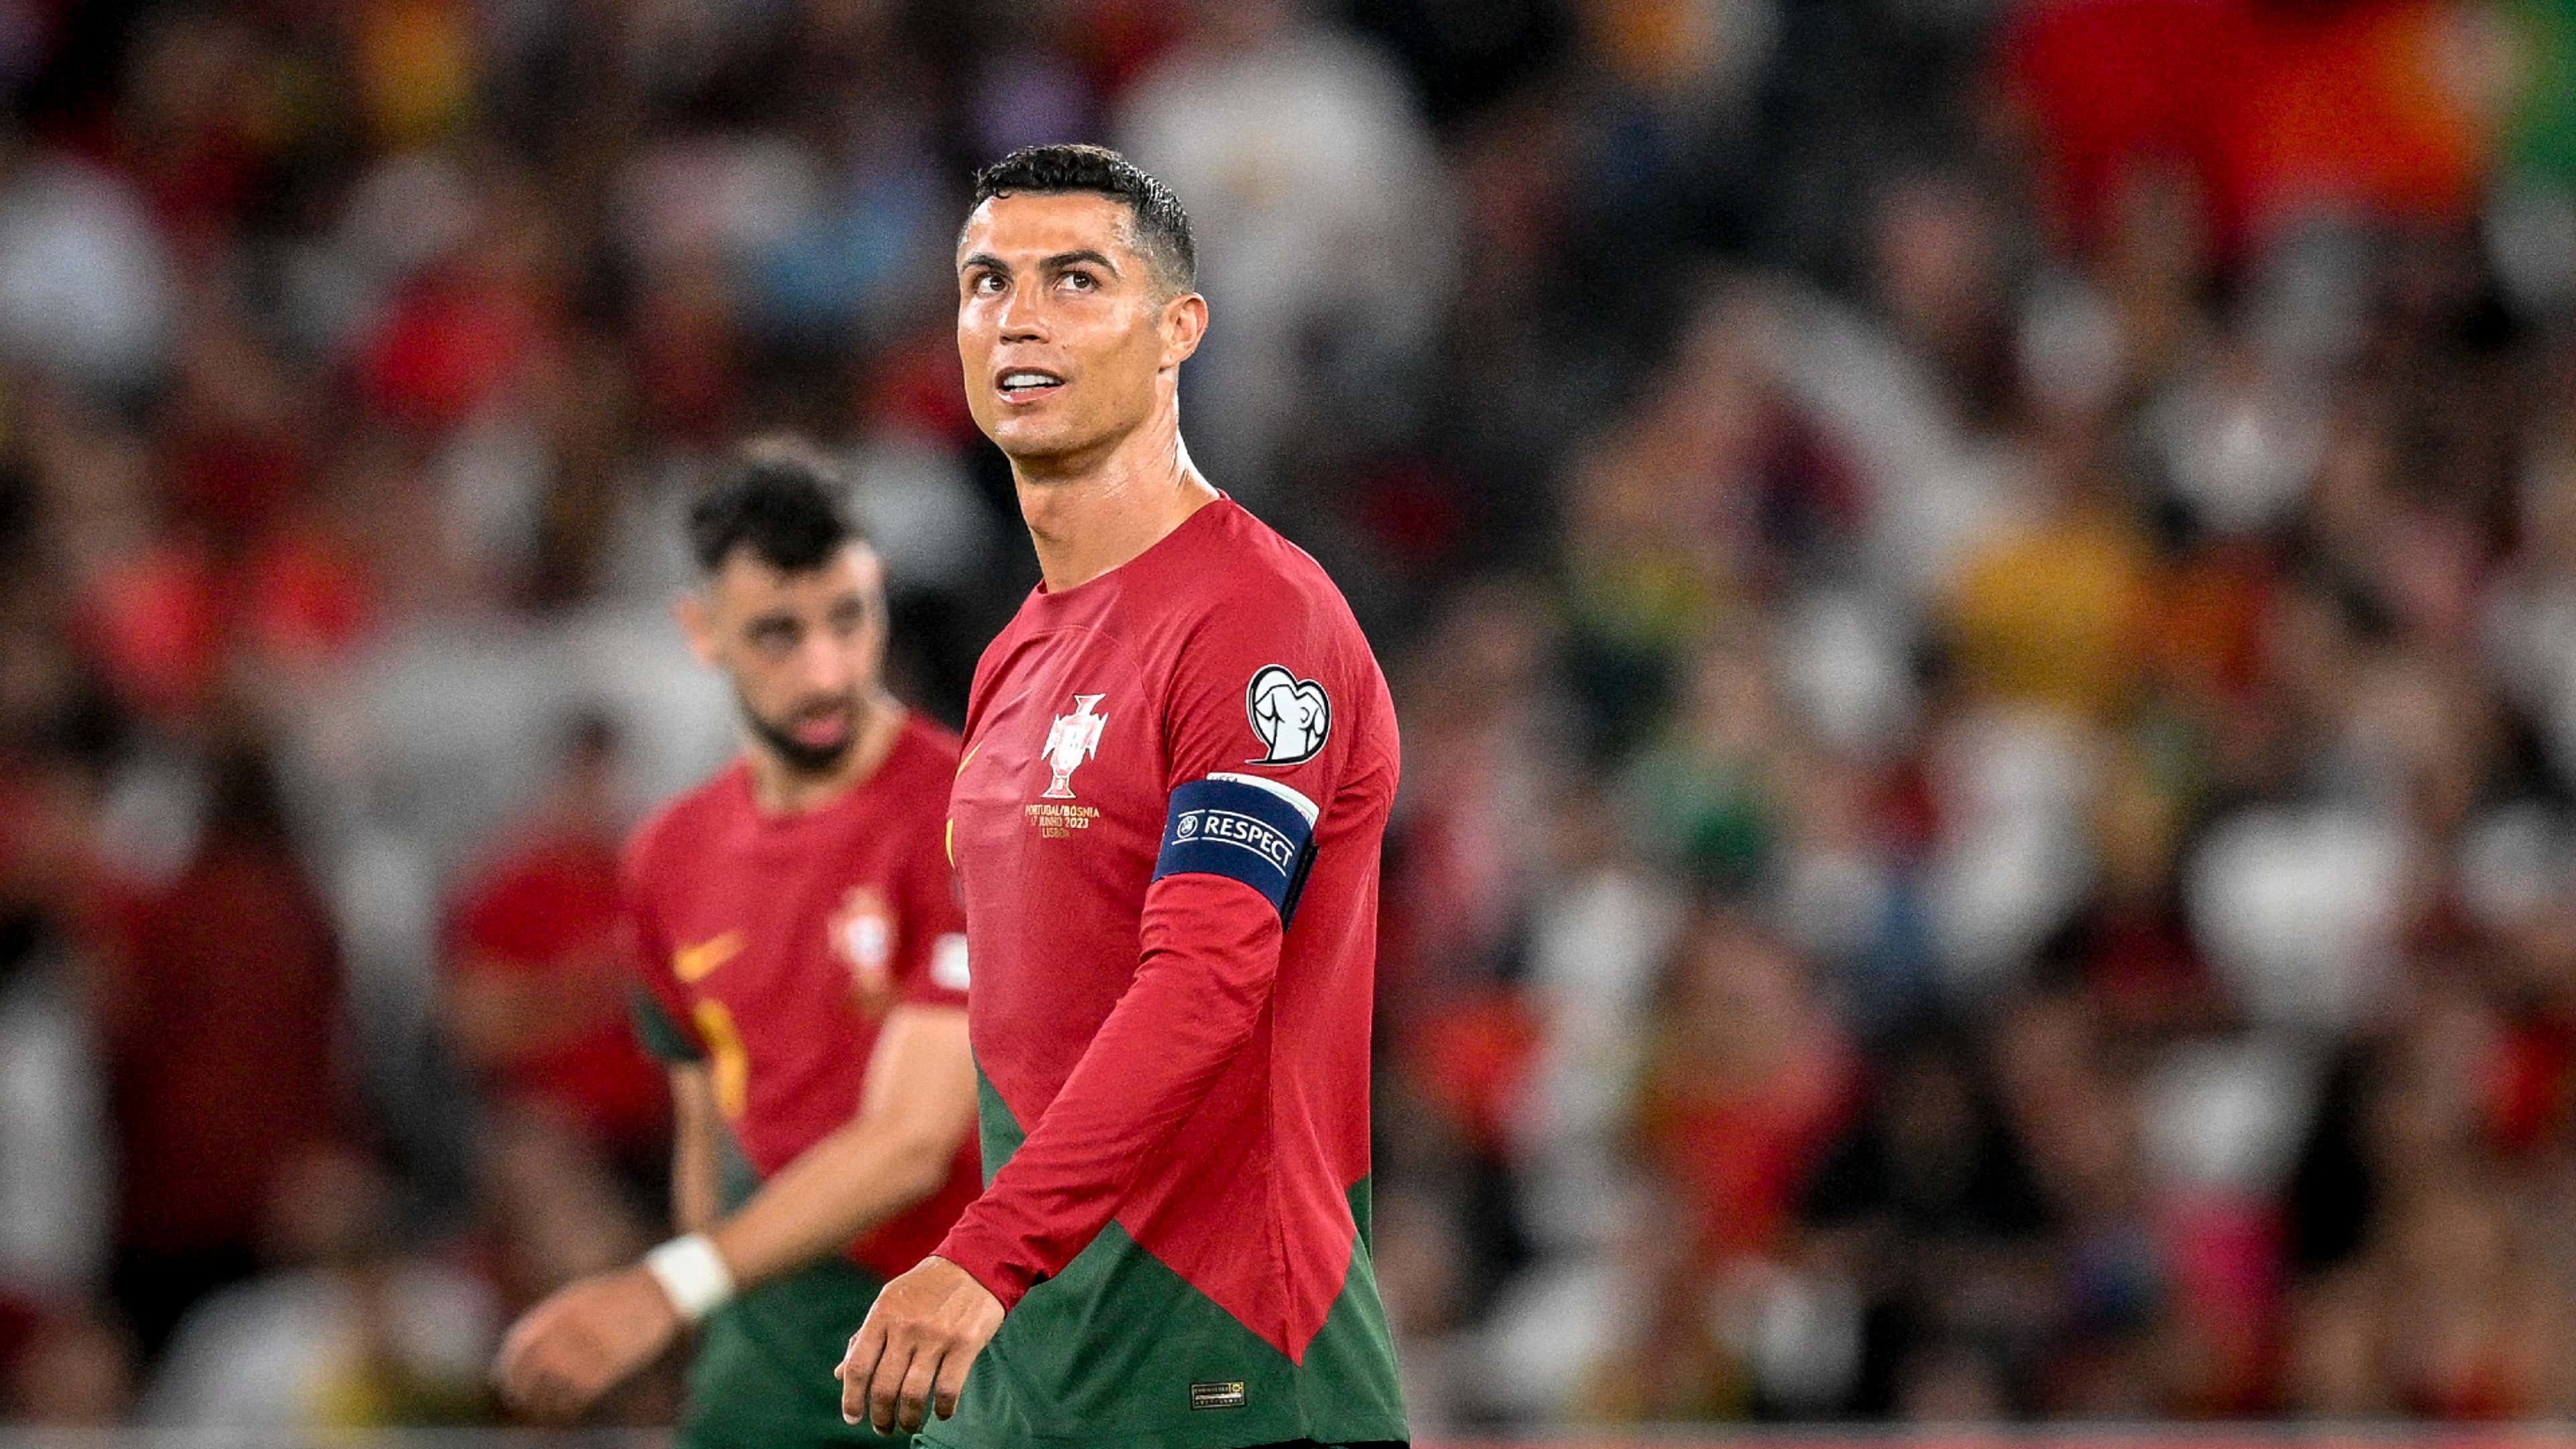 Cristiano Ronaldo returns to Al-Nassr early after Portugal suspension - but  Goncalo Ramos praises CR7 for providing 'great support' in dressing room